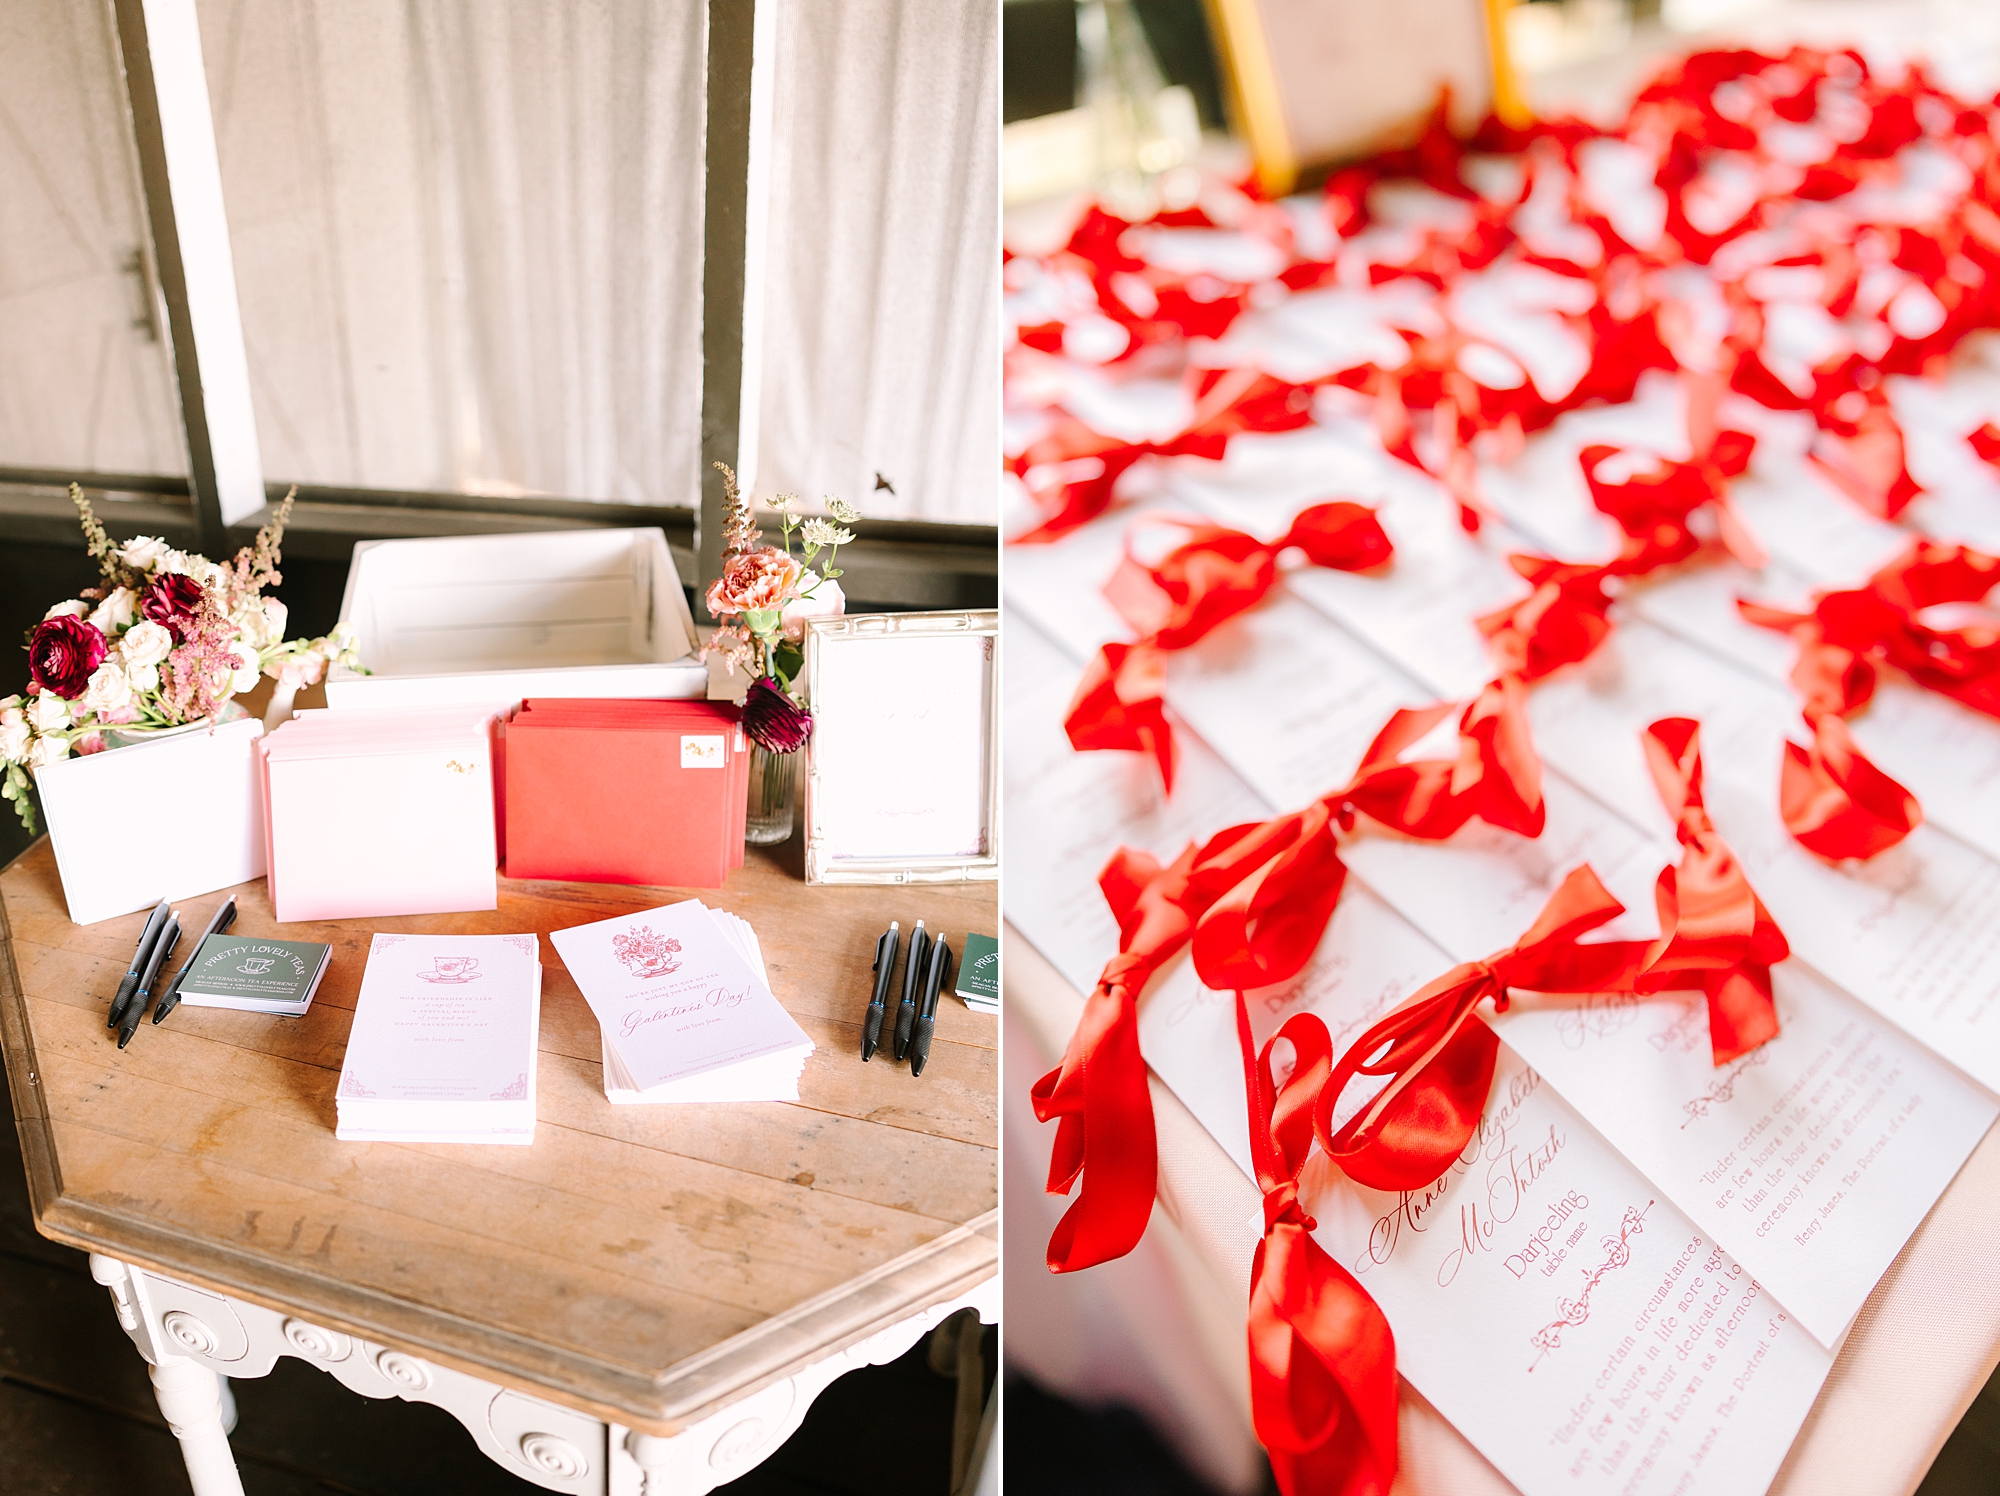 menus with red ribbons for tea party